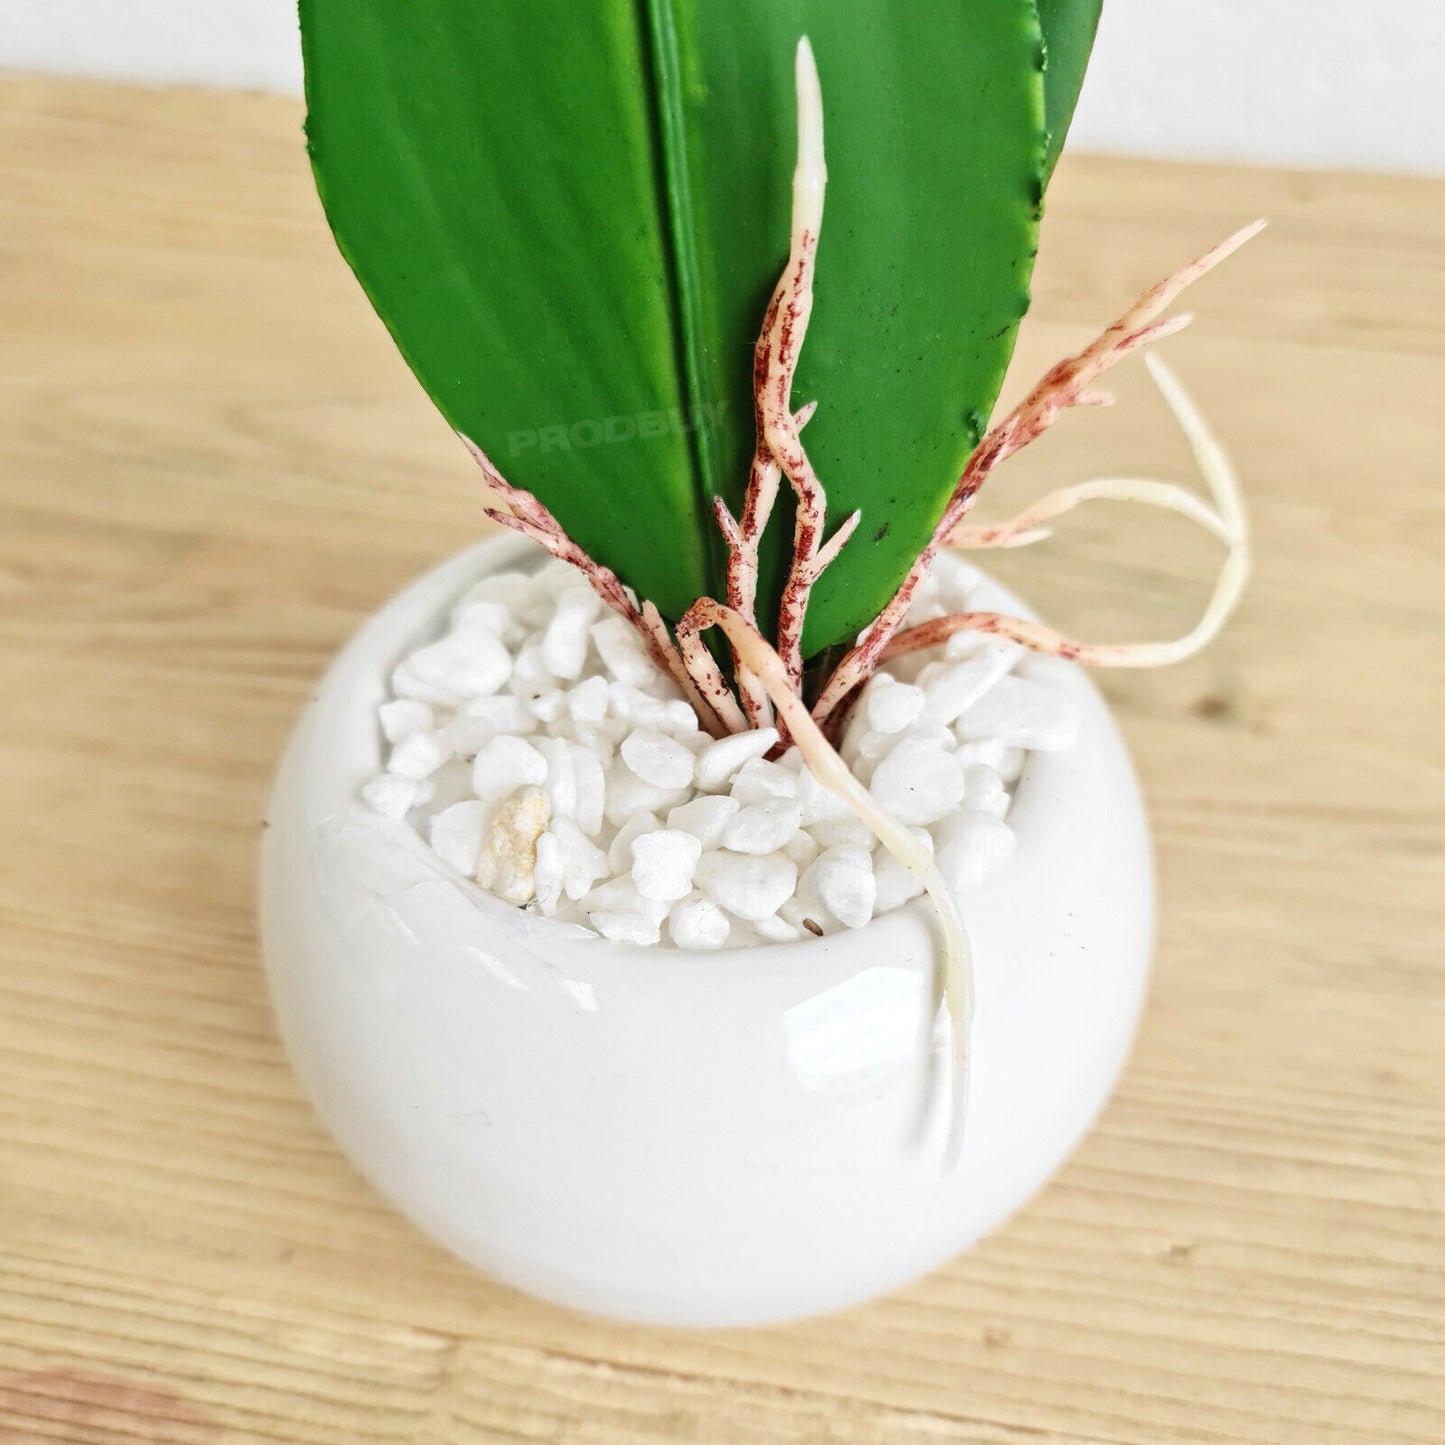 Artifical Pink Orchid House Plant In Pot